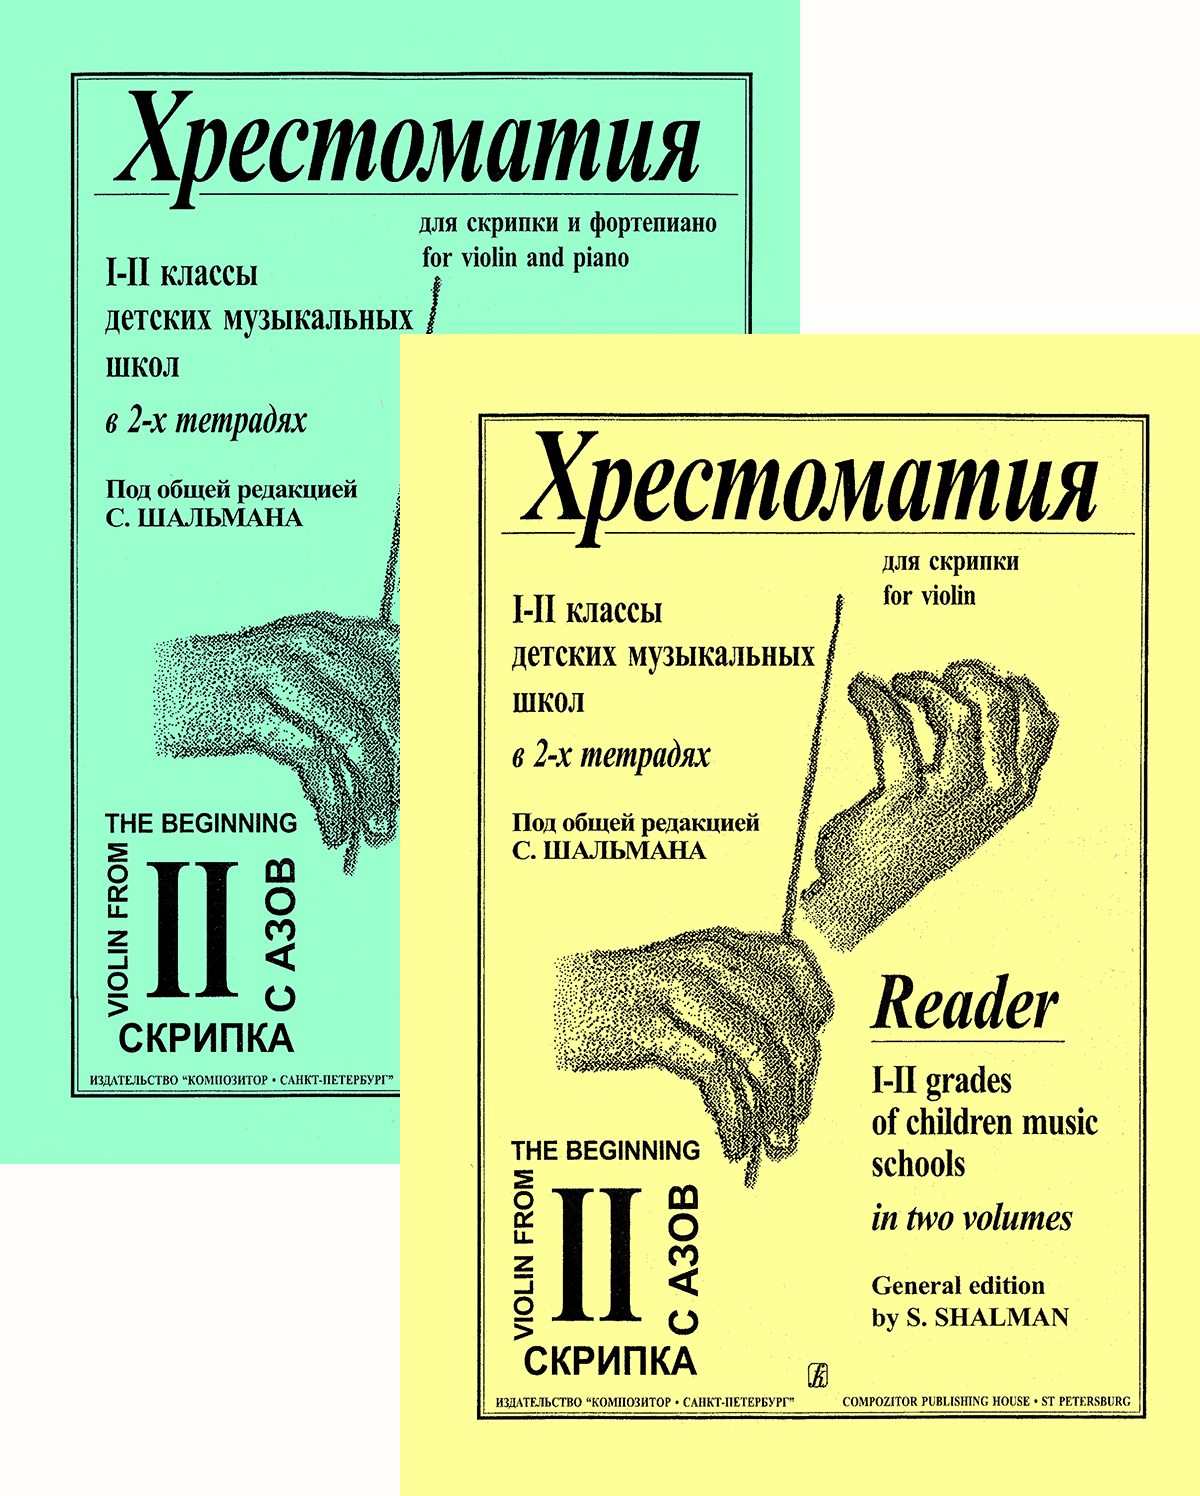 Schalman S. Comp. Reader. Vol. 2. For 1–2 forms. For violin and piano. Score and part